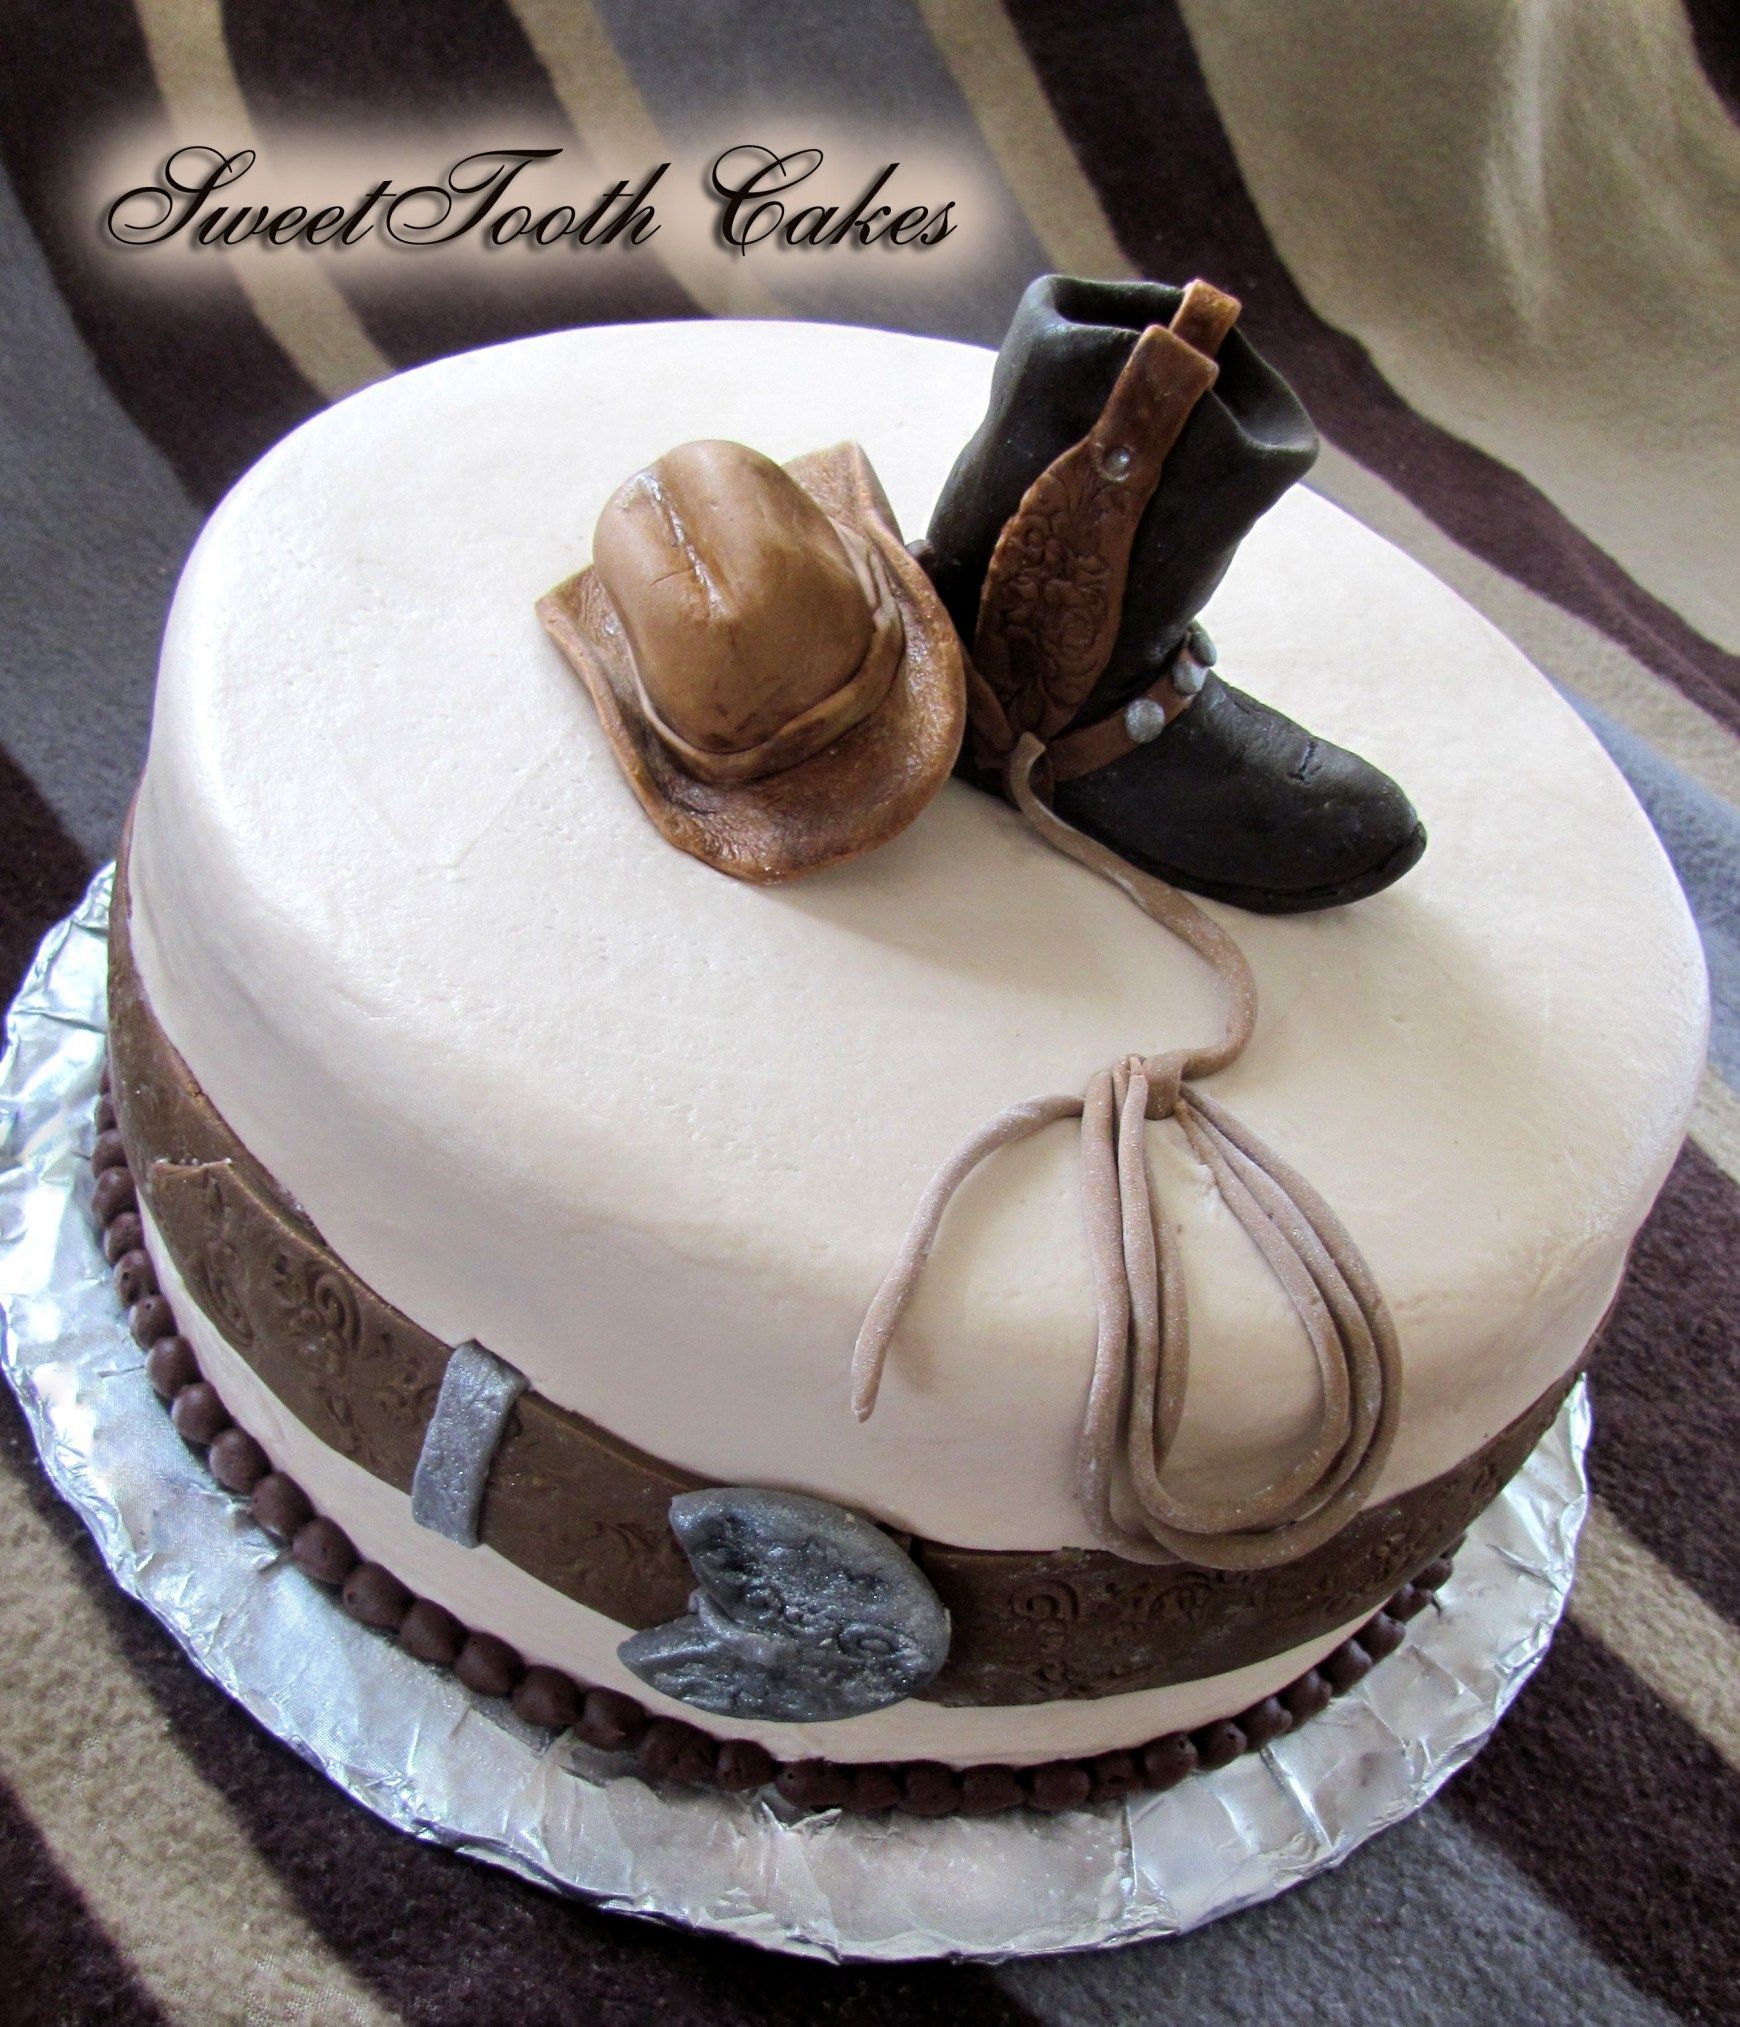 30+ Exclusive Image of Western Birthday Cakes -   6 western cake For Men ideas